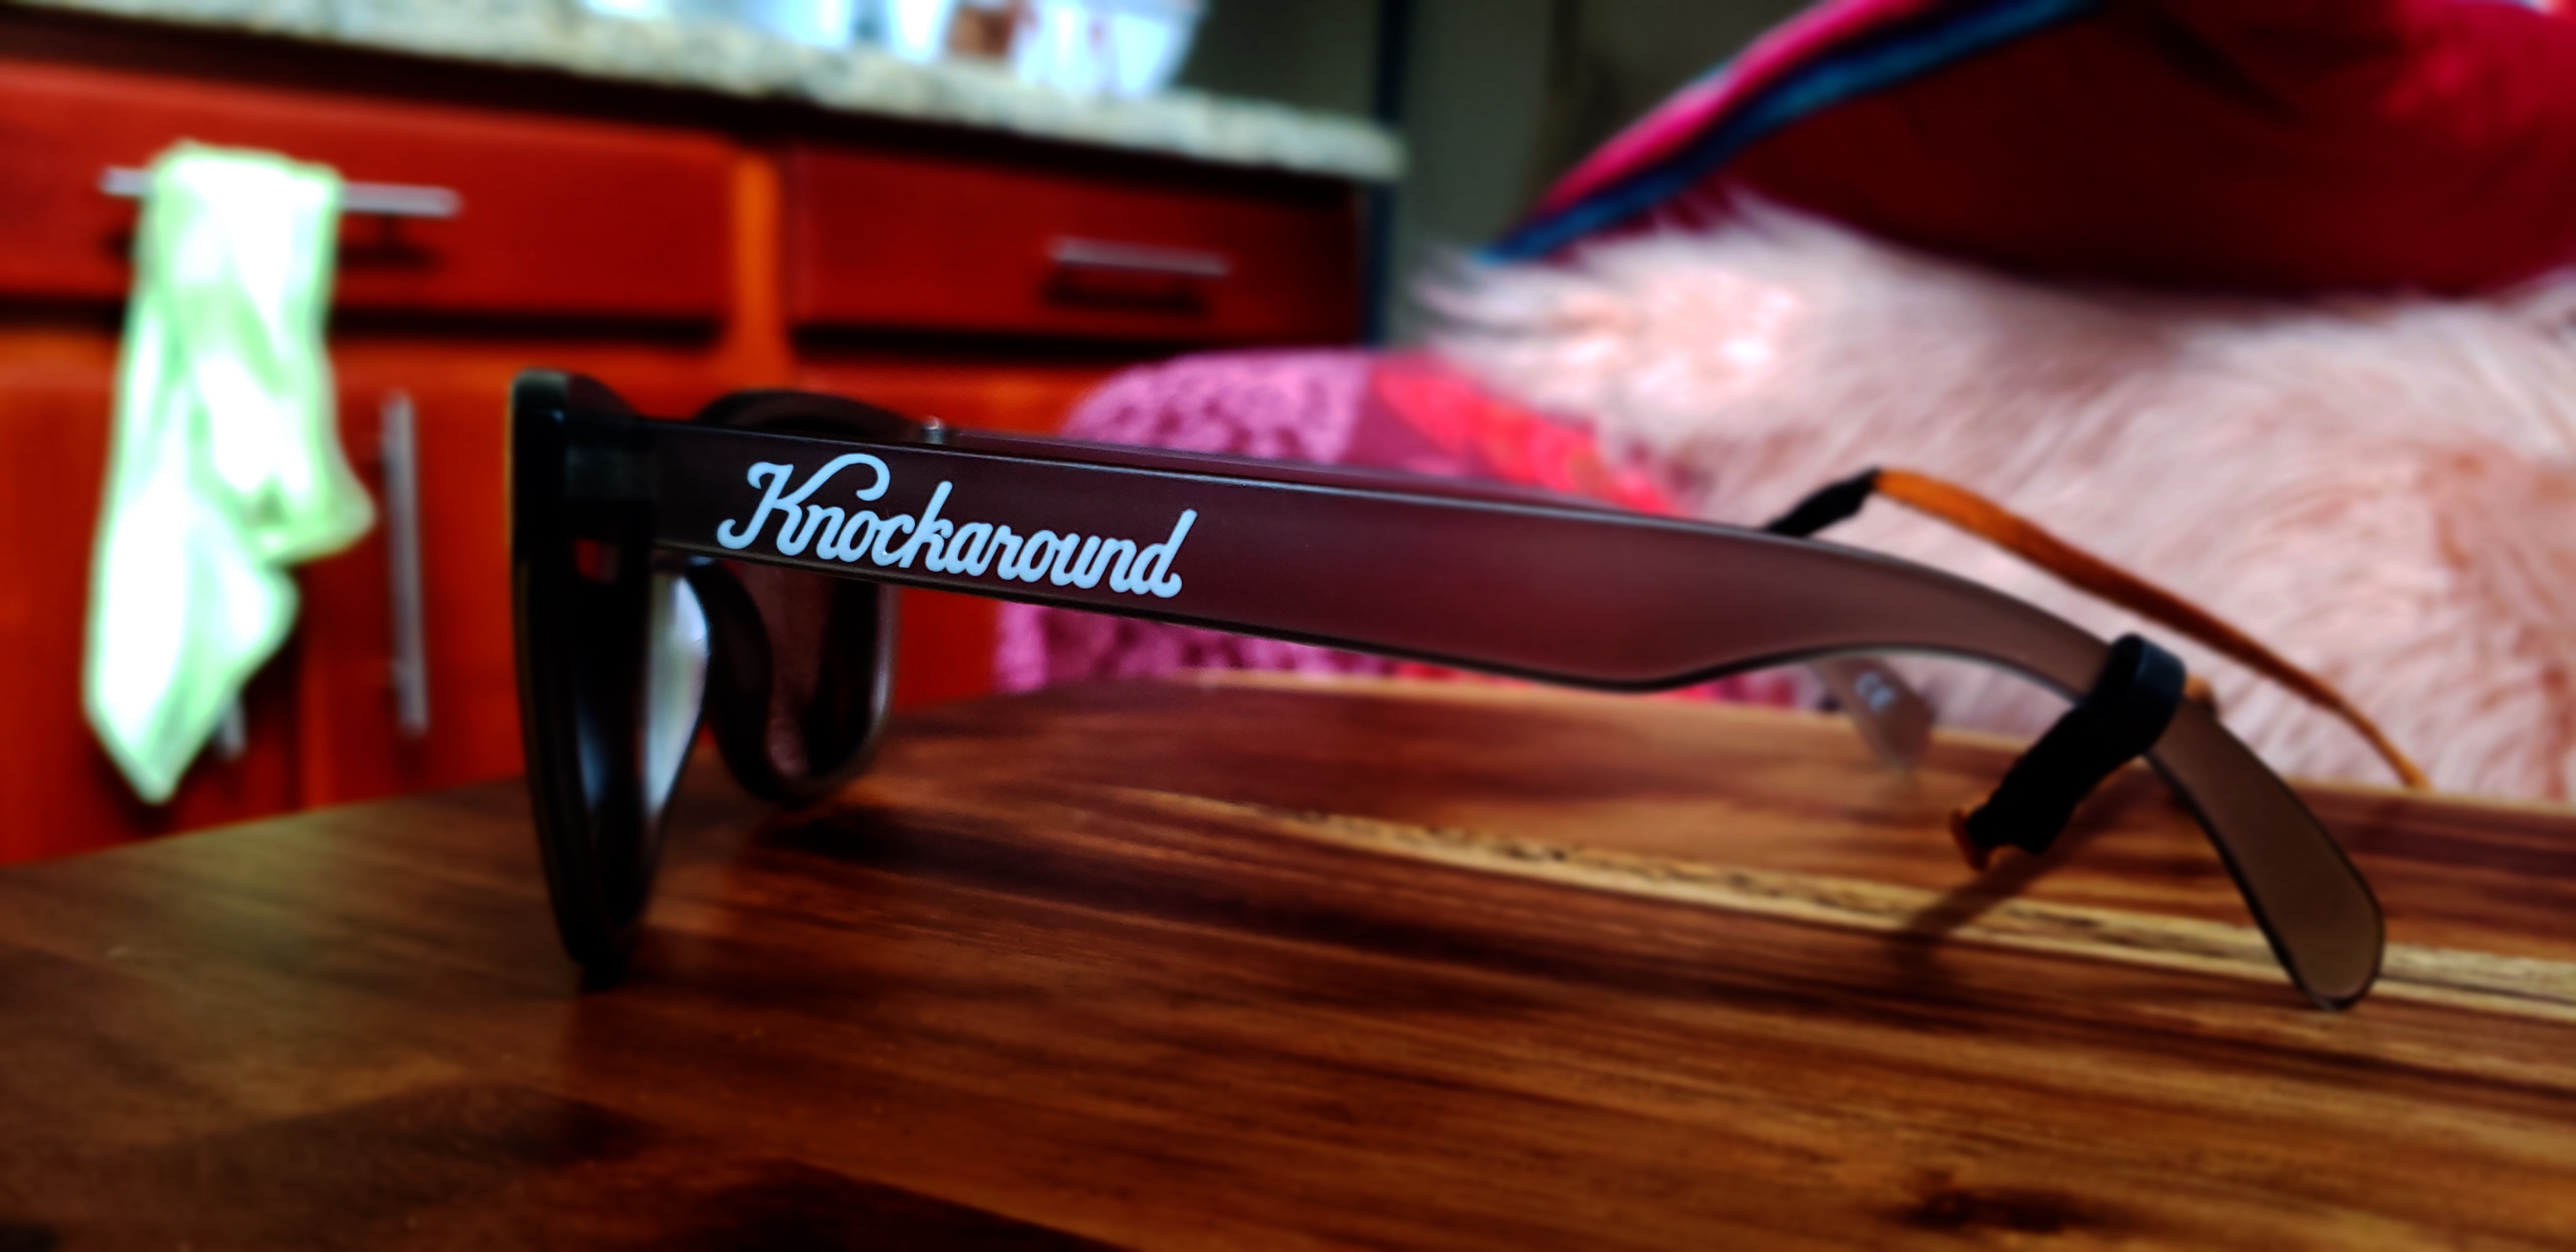 https://thebackpackguide.com/wp-content/uploads/2018/10/Knockaround-Sunglasses-Review-Featured-Image.jpg